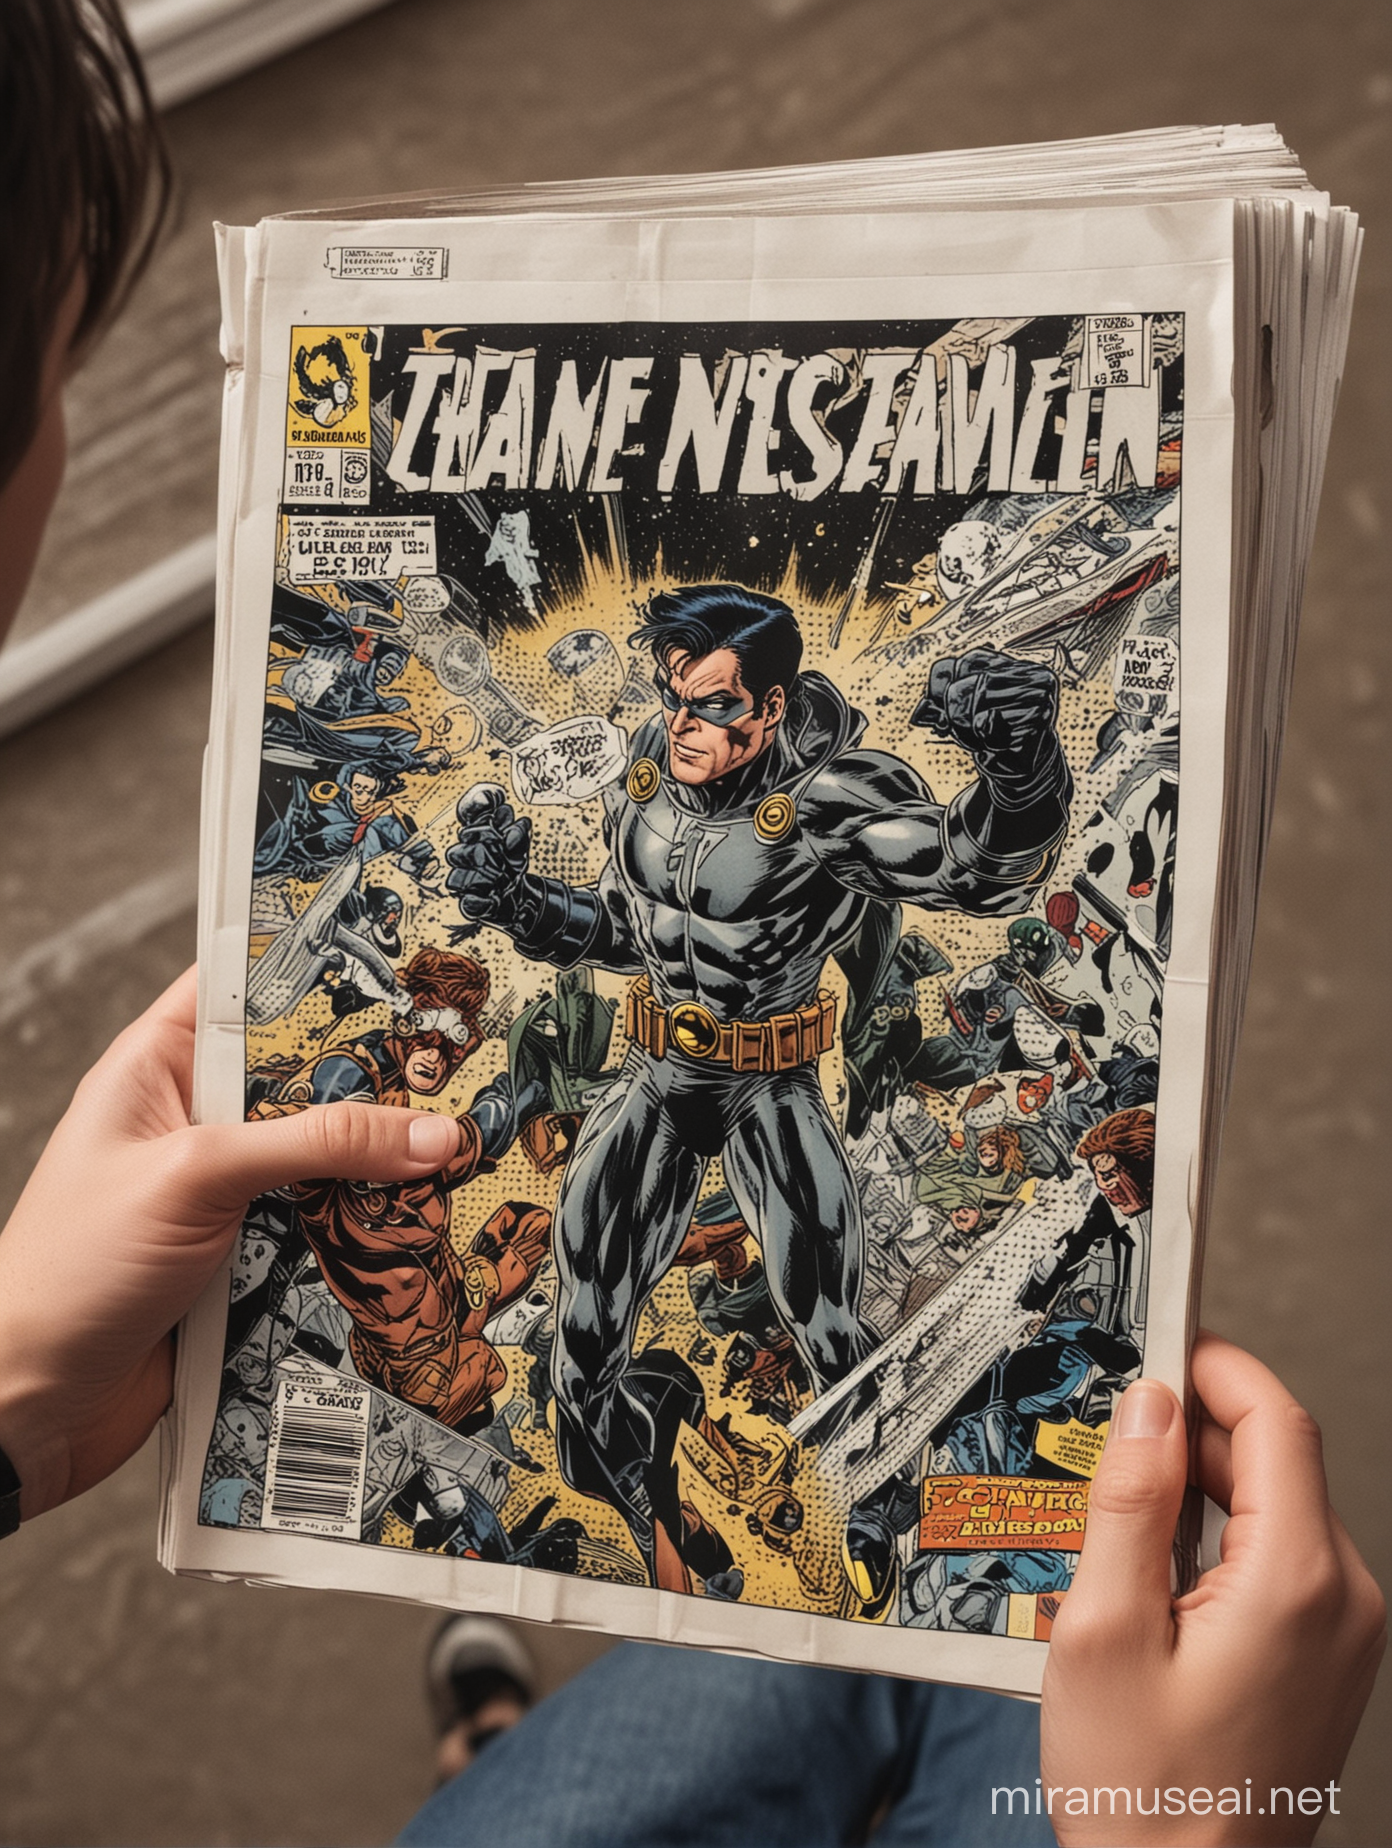 person holding a comic book, looking at the cover